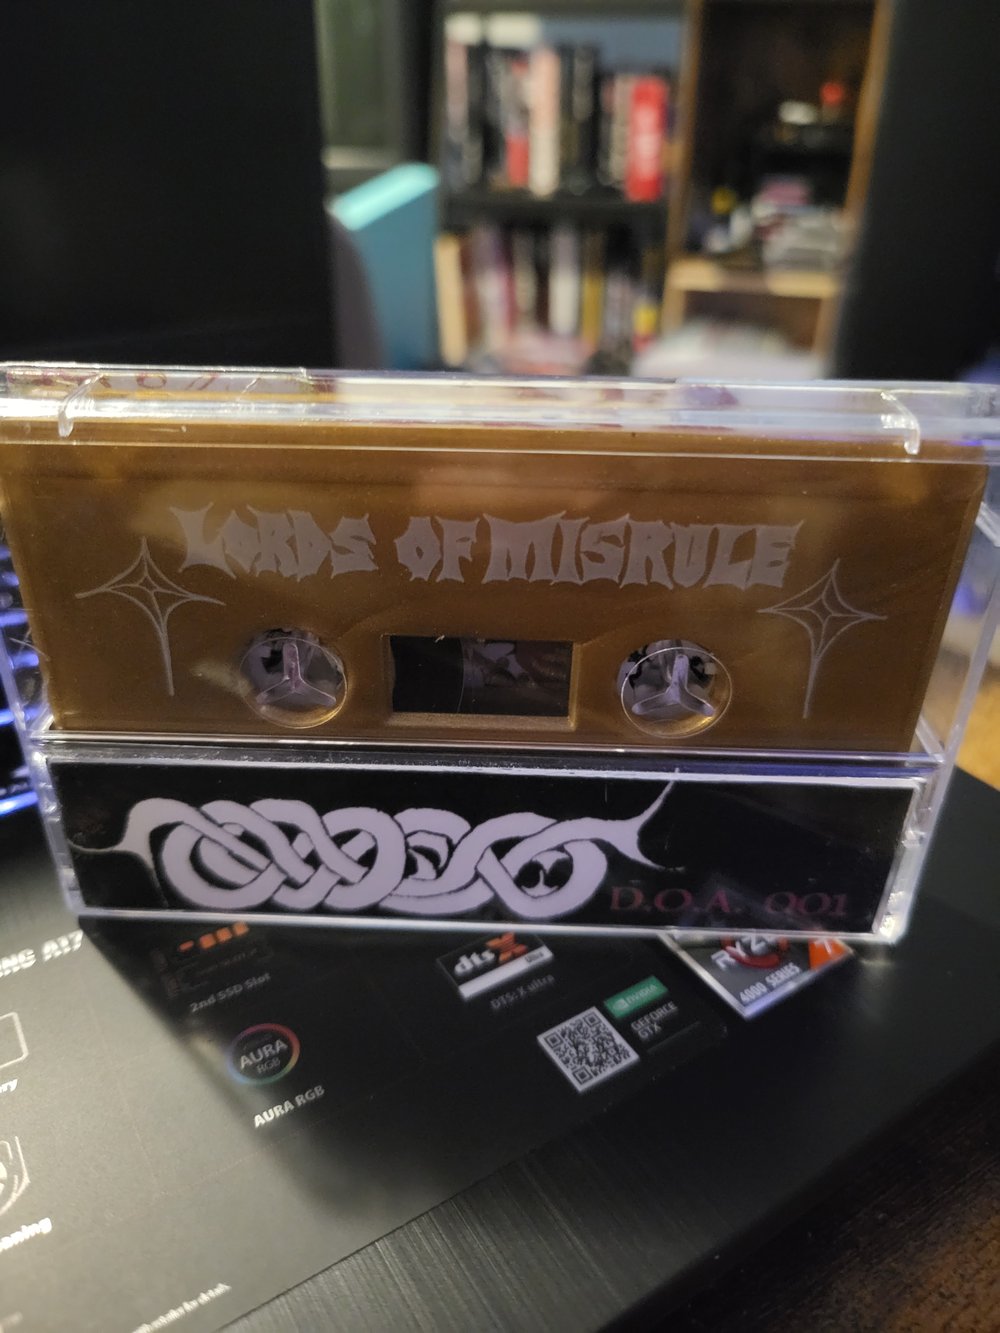 Rigorous Institution - Lords of Misrule Cassette